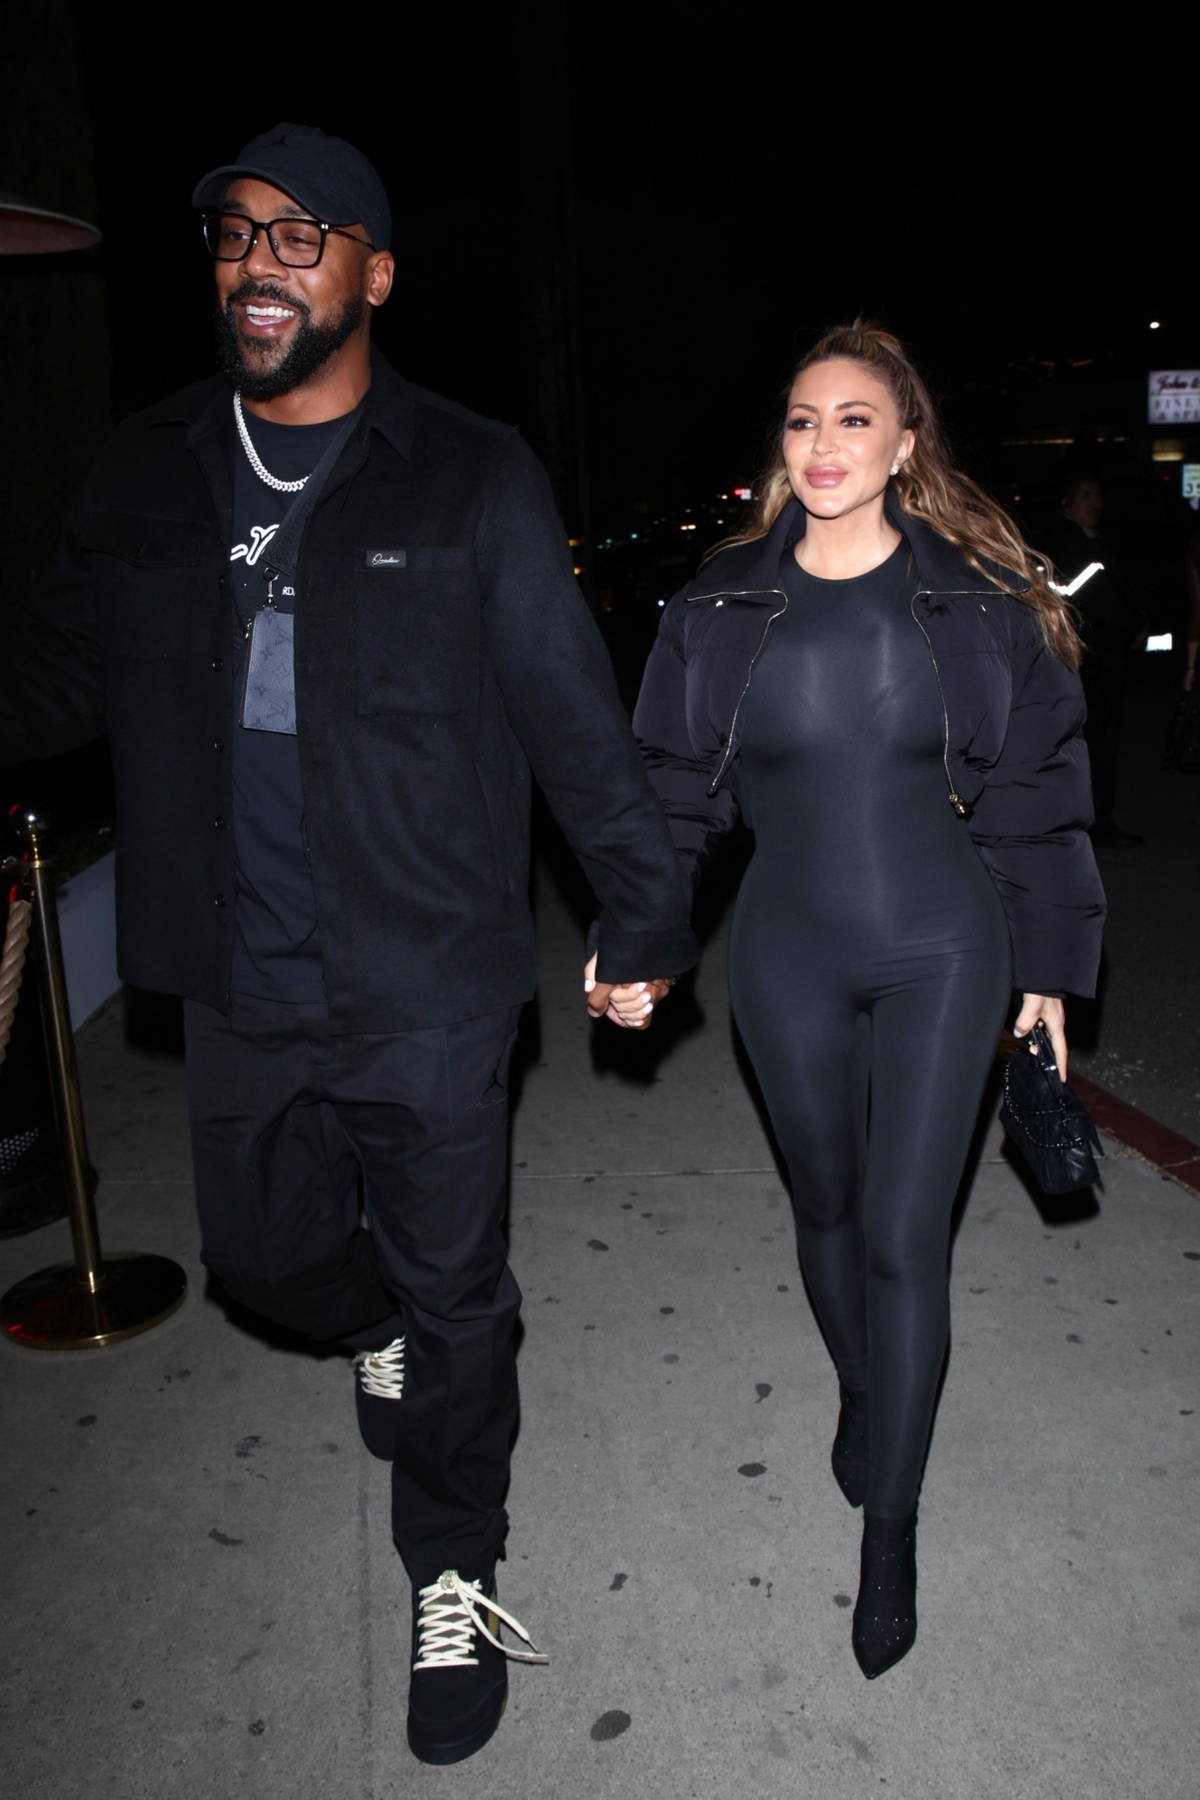 https://www.celebsfirst.com/wp-content/uploads/2023/12/Larsa-Pippen-shows-off-her-curvy-figure-in-a-black-bodysuit-during-a-dinner-date-with-boyfriend-Marcus-Jordan-in-West-Hollywood-California-231223_3.jpg